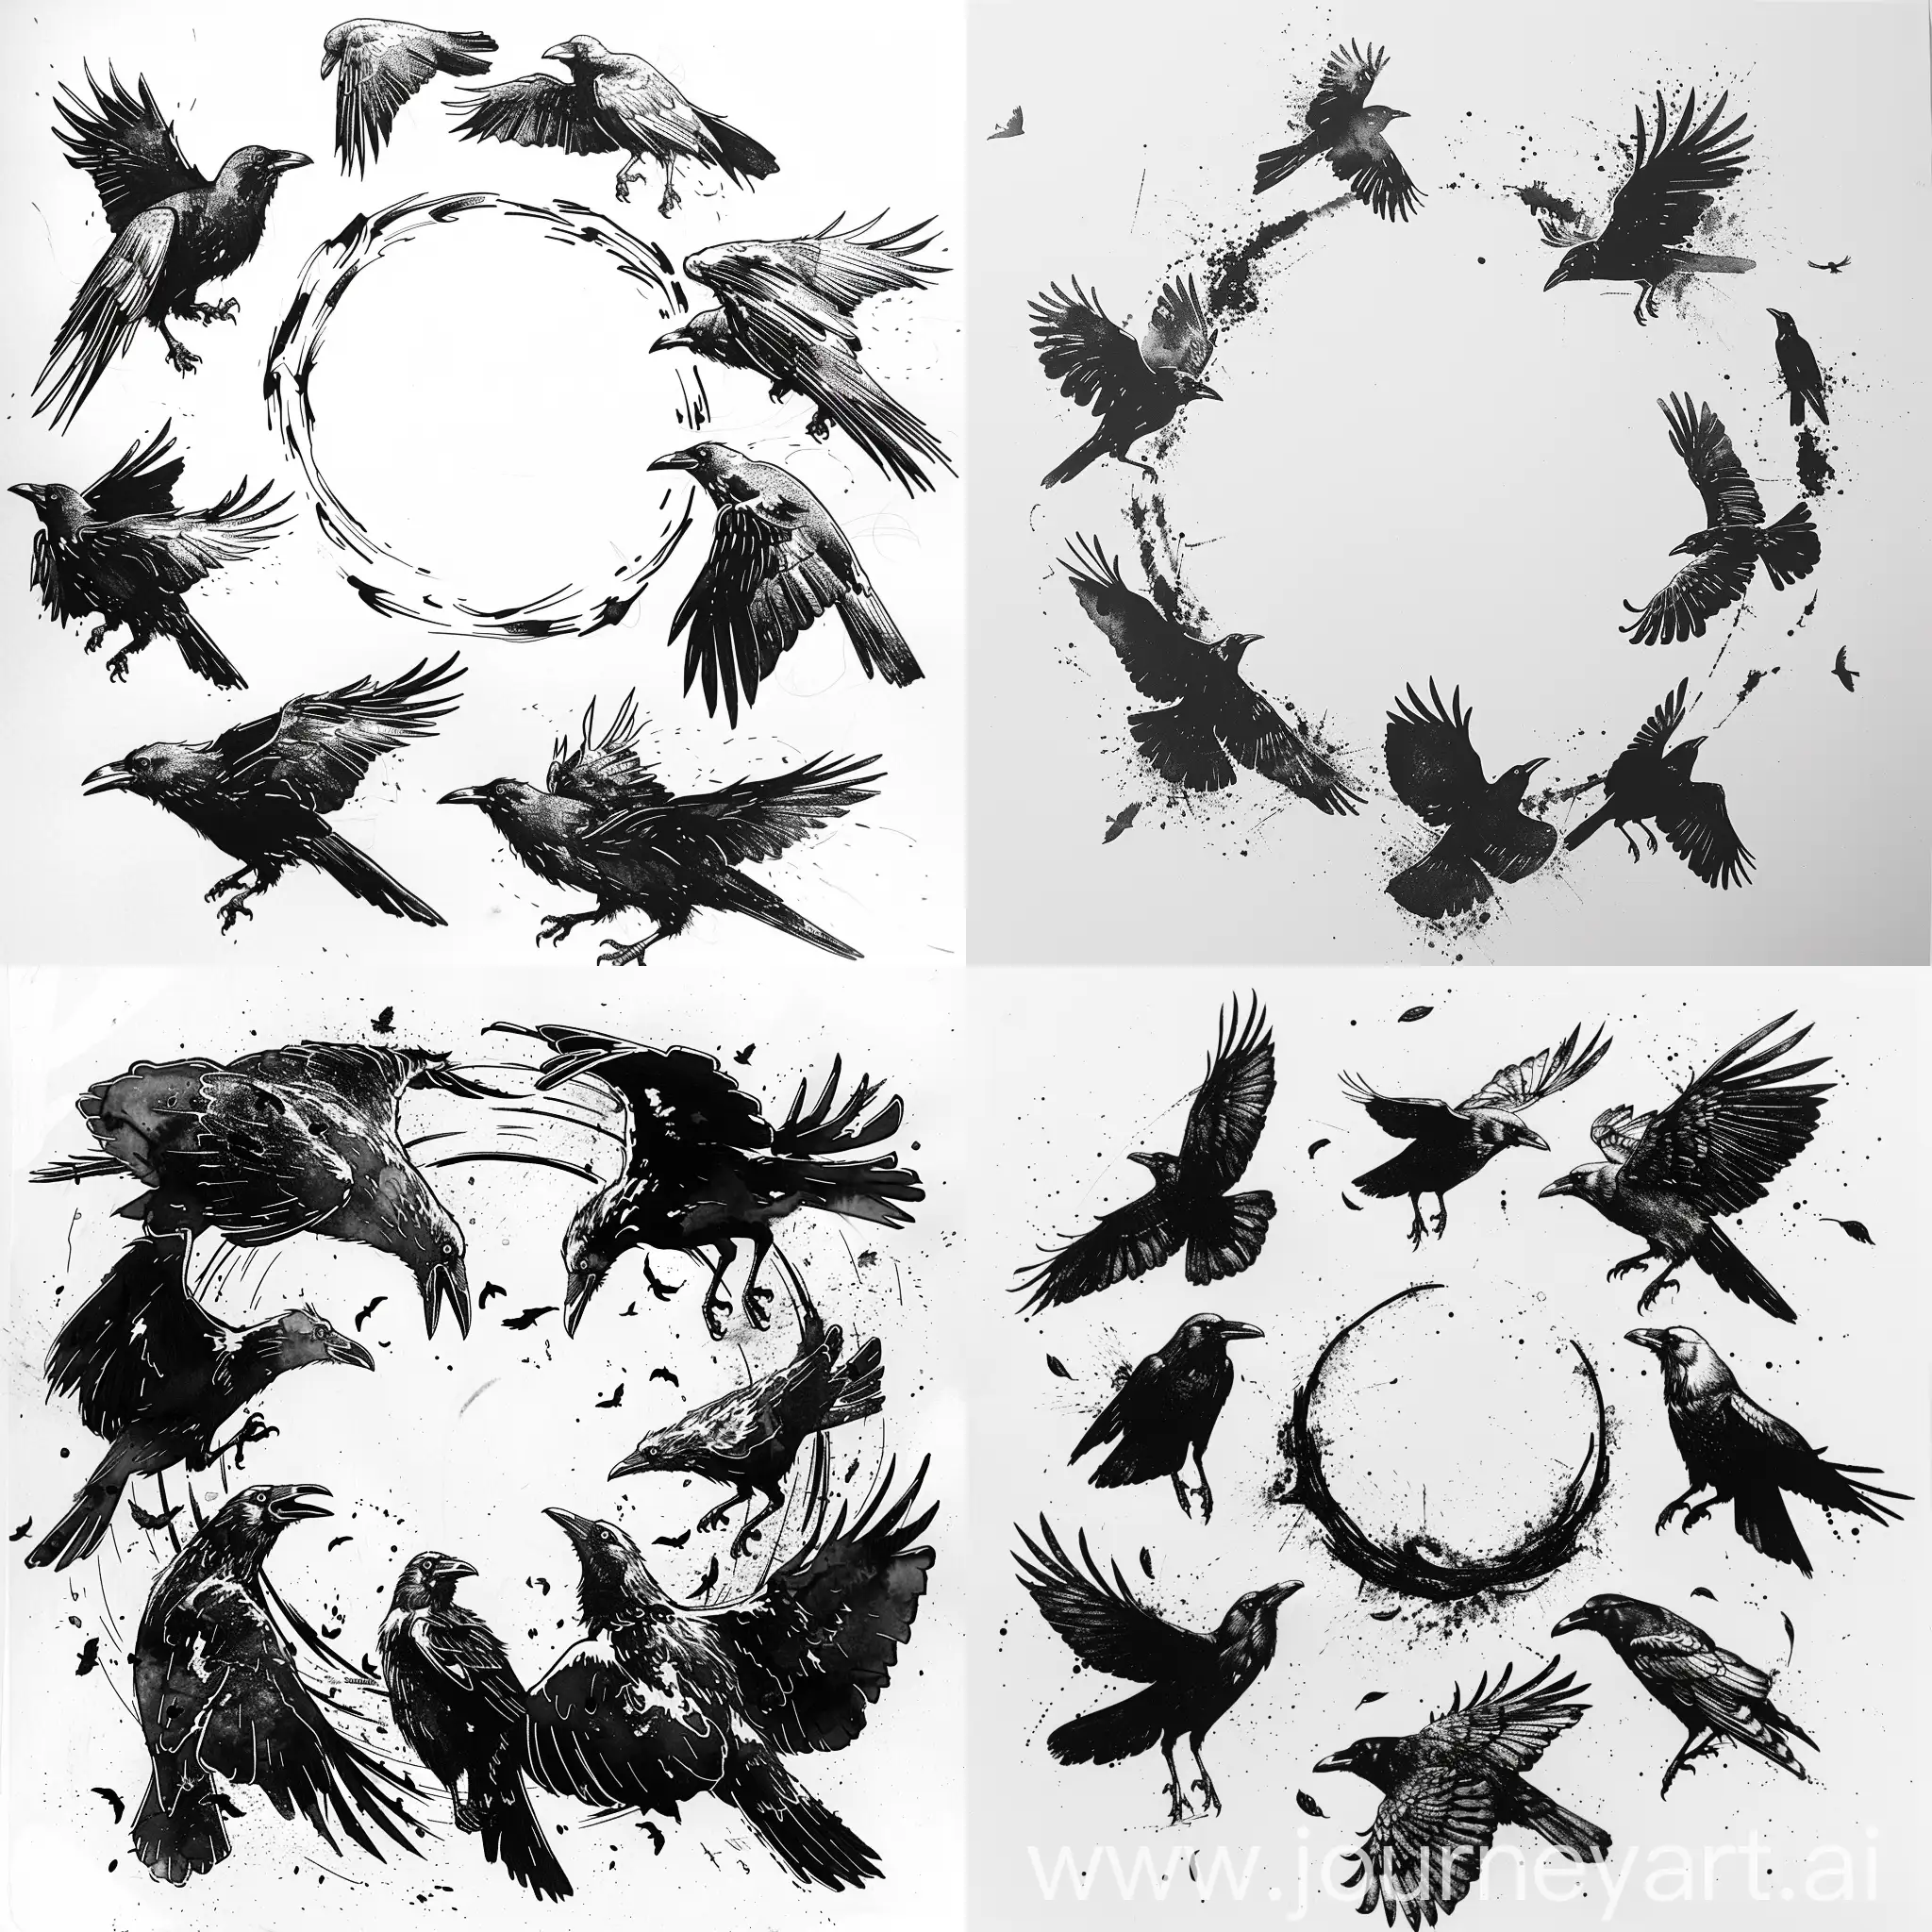 Monochrome-Line-Art-Crows-Circling-in-a-Ring